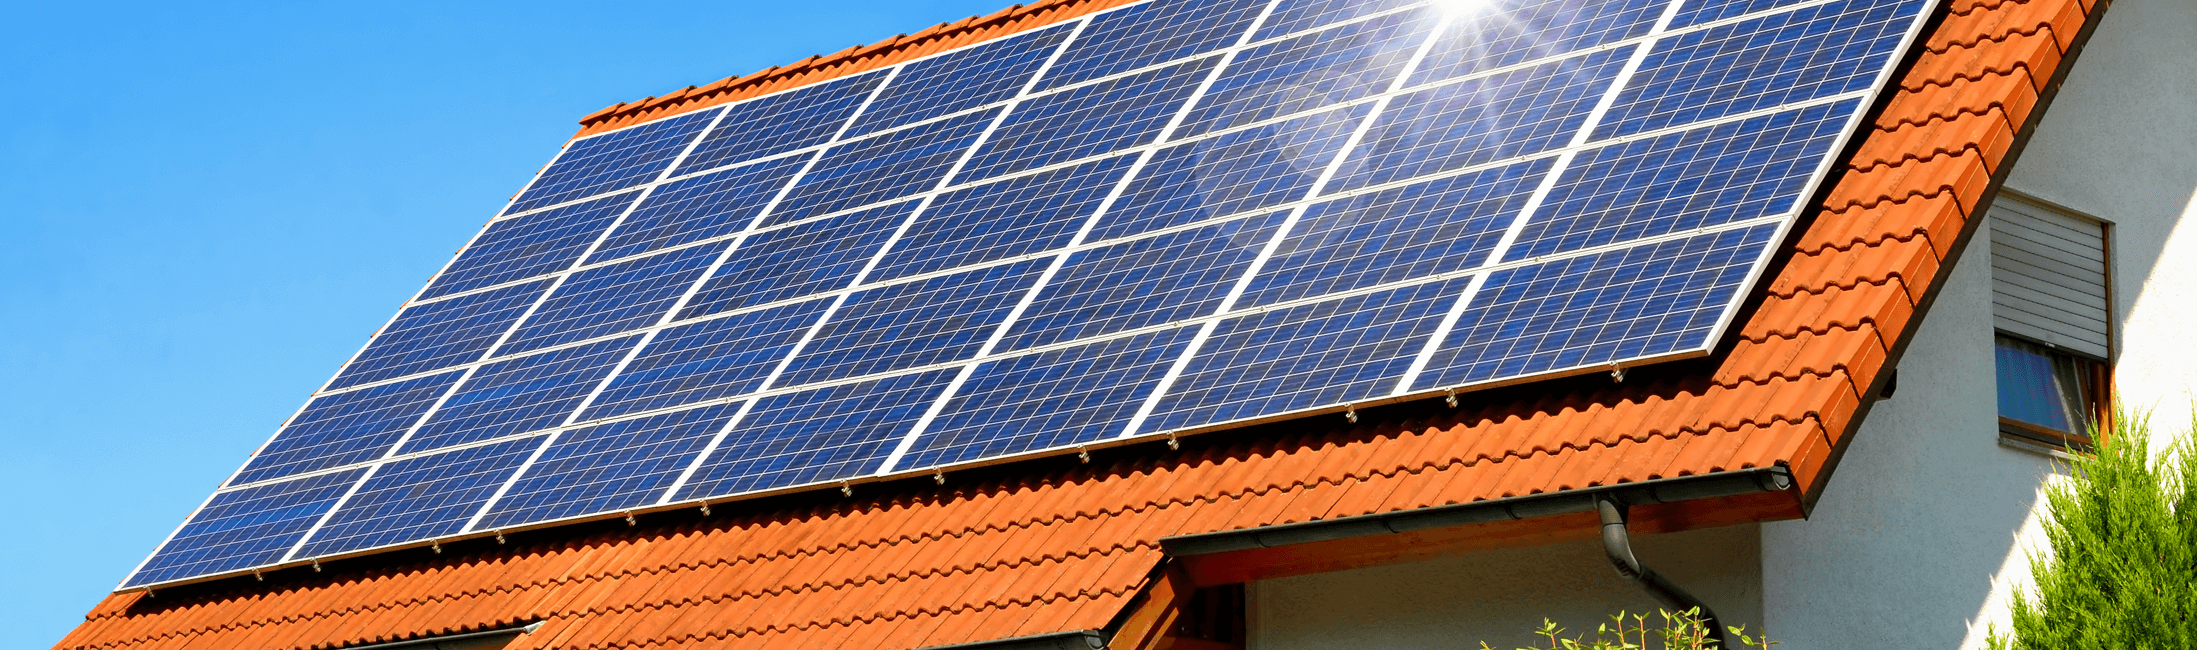 Preparing Your Household For a New Solar Panel System